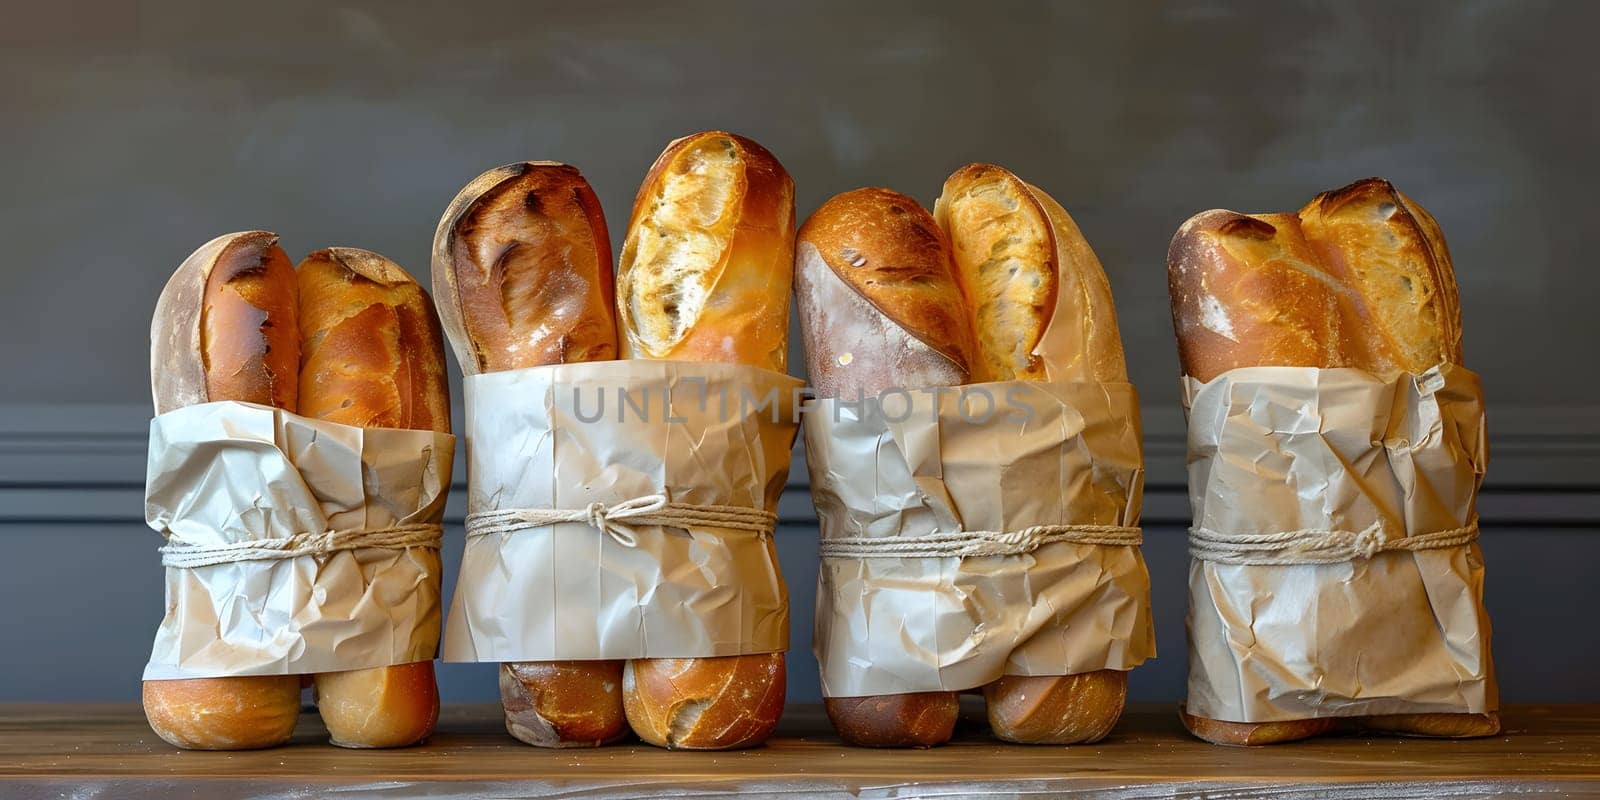 Four loaves of bread, a staple food ingredient in many cuisines, are neatly wrapped in brown paper. These baked goods can be used in various dishes and recipes for any event